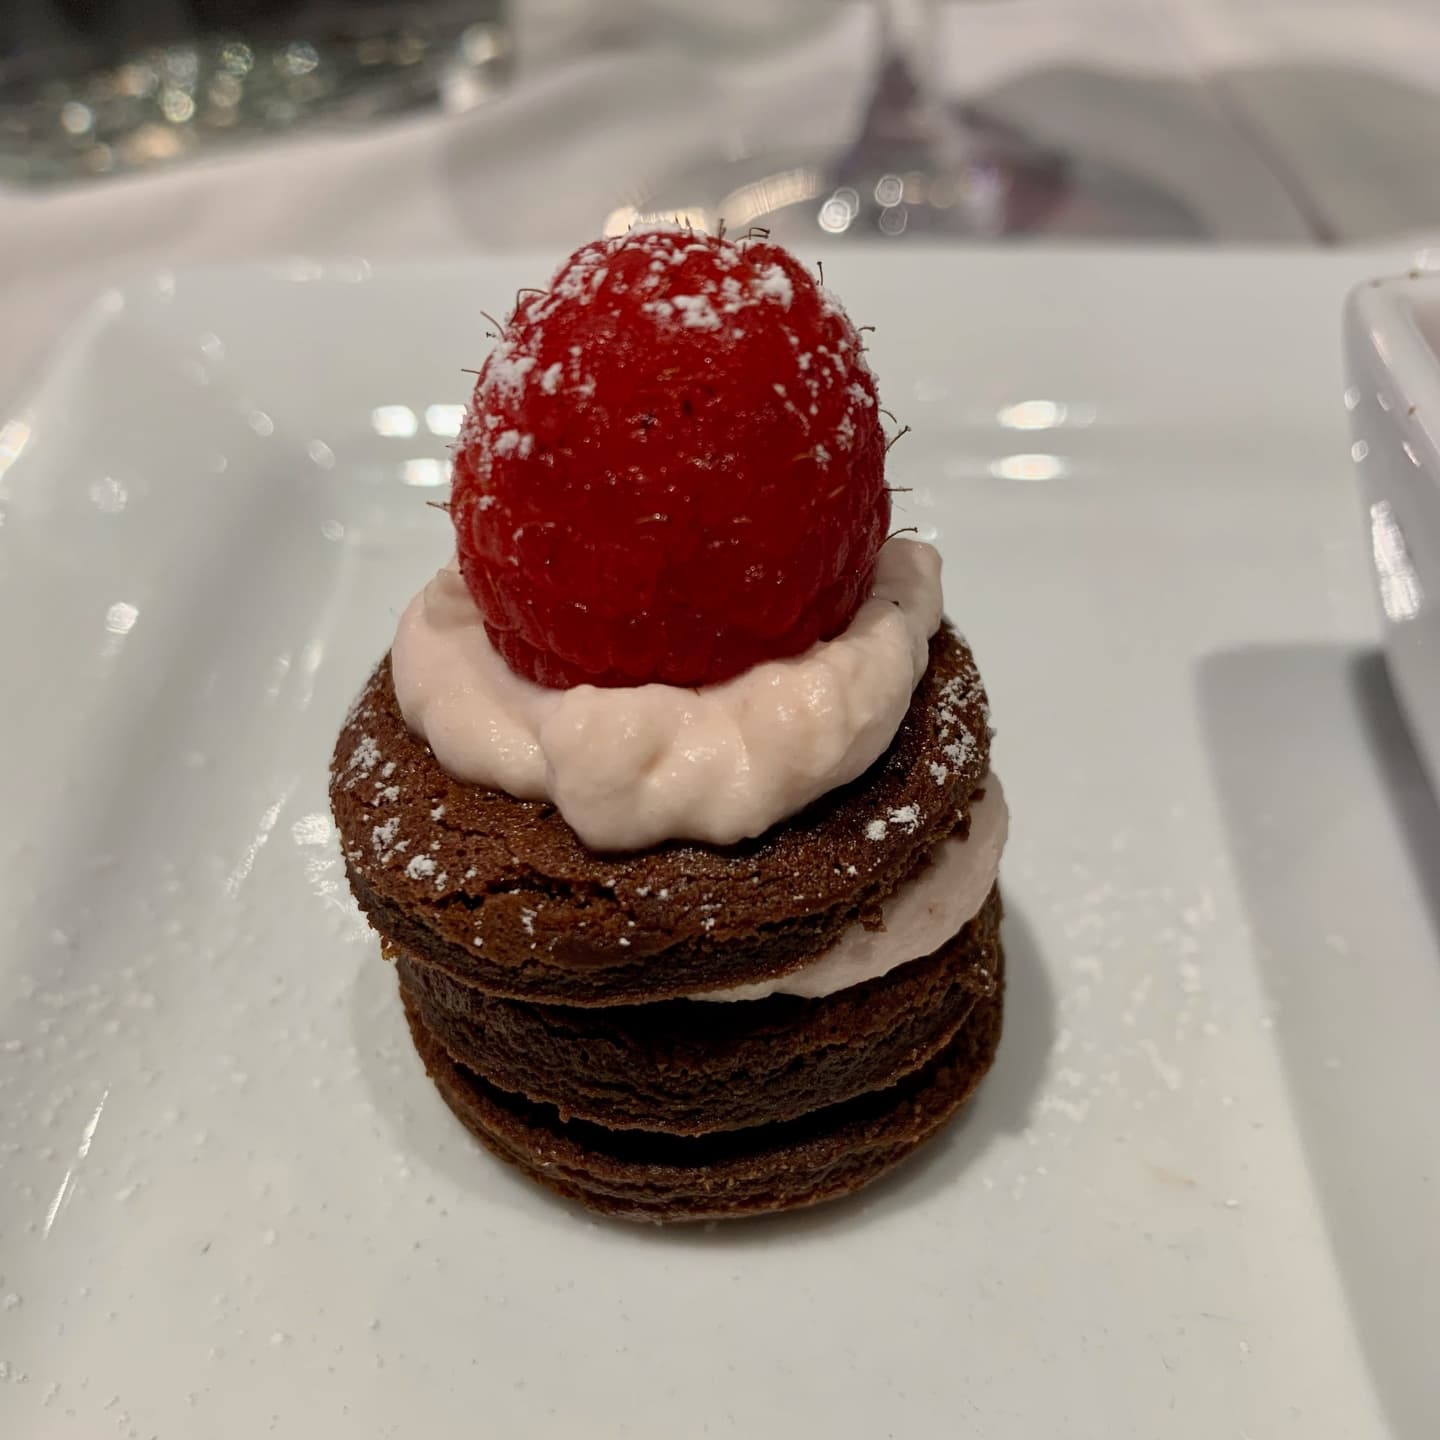 a picture of a chocolate dessert